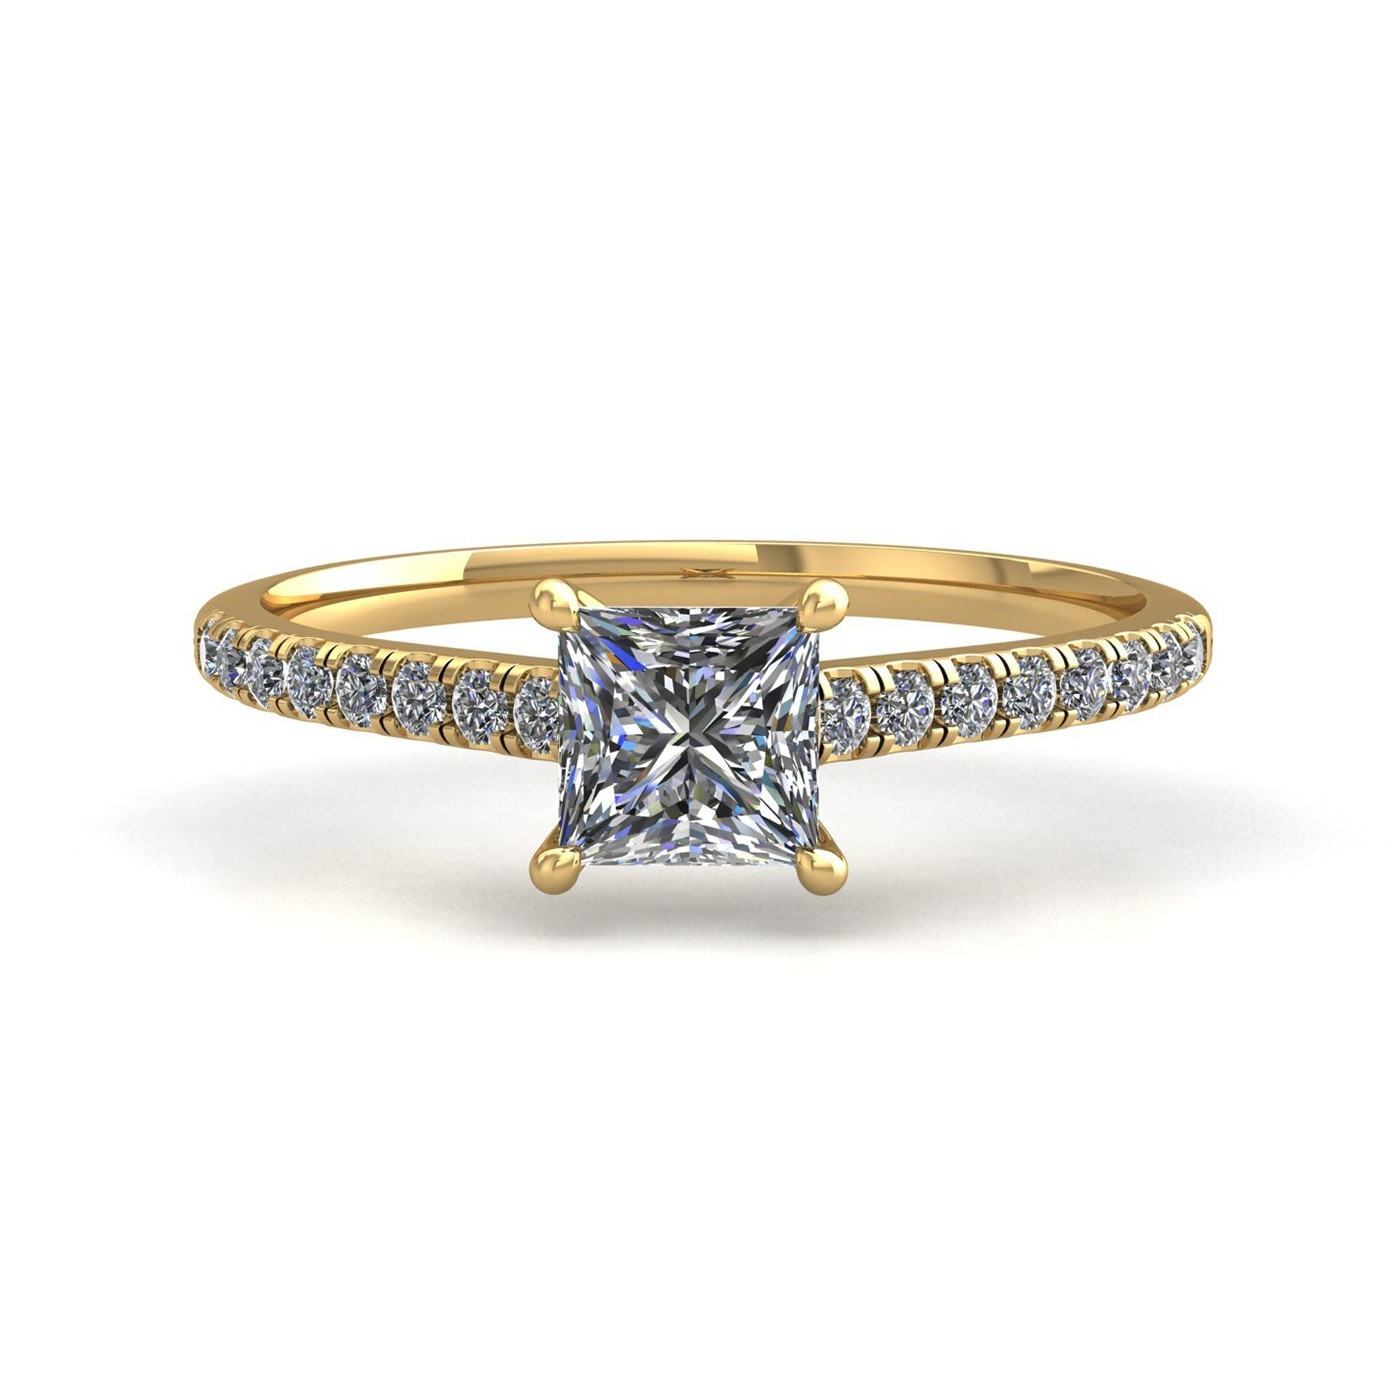 18k yellow gold  0,30 ct 4 prongs princess cut diamond engagement ring with whisper thin pavÉ set band Photos & images